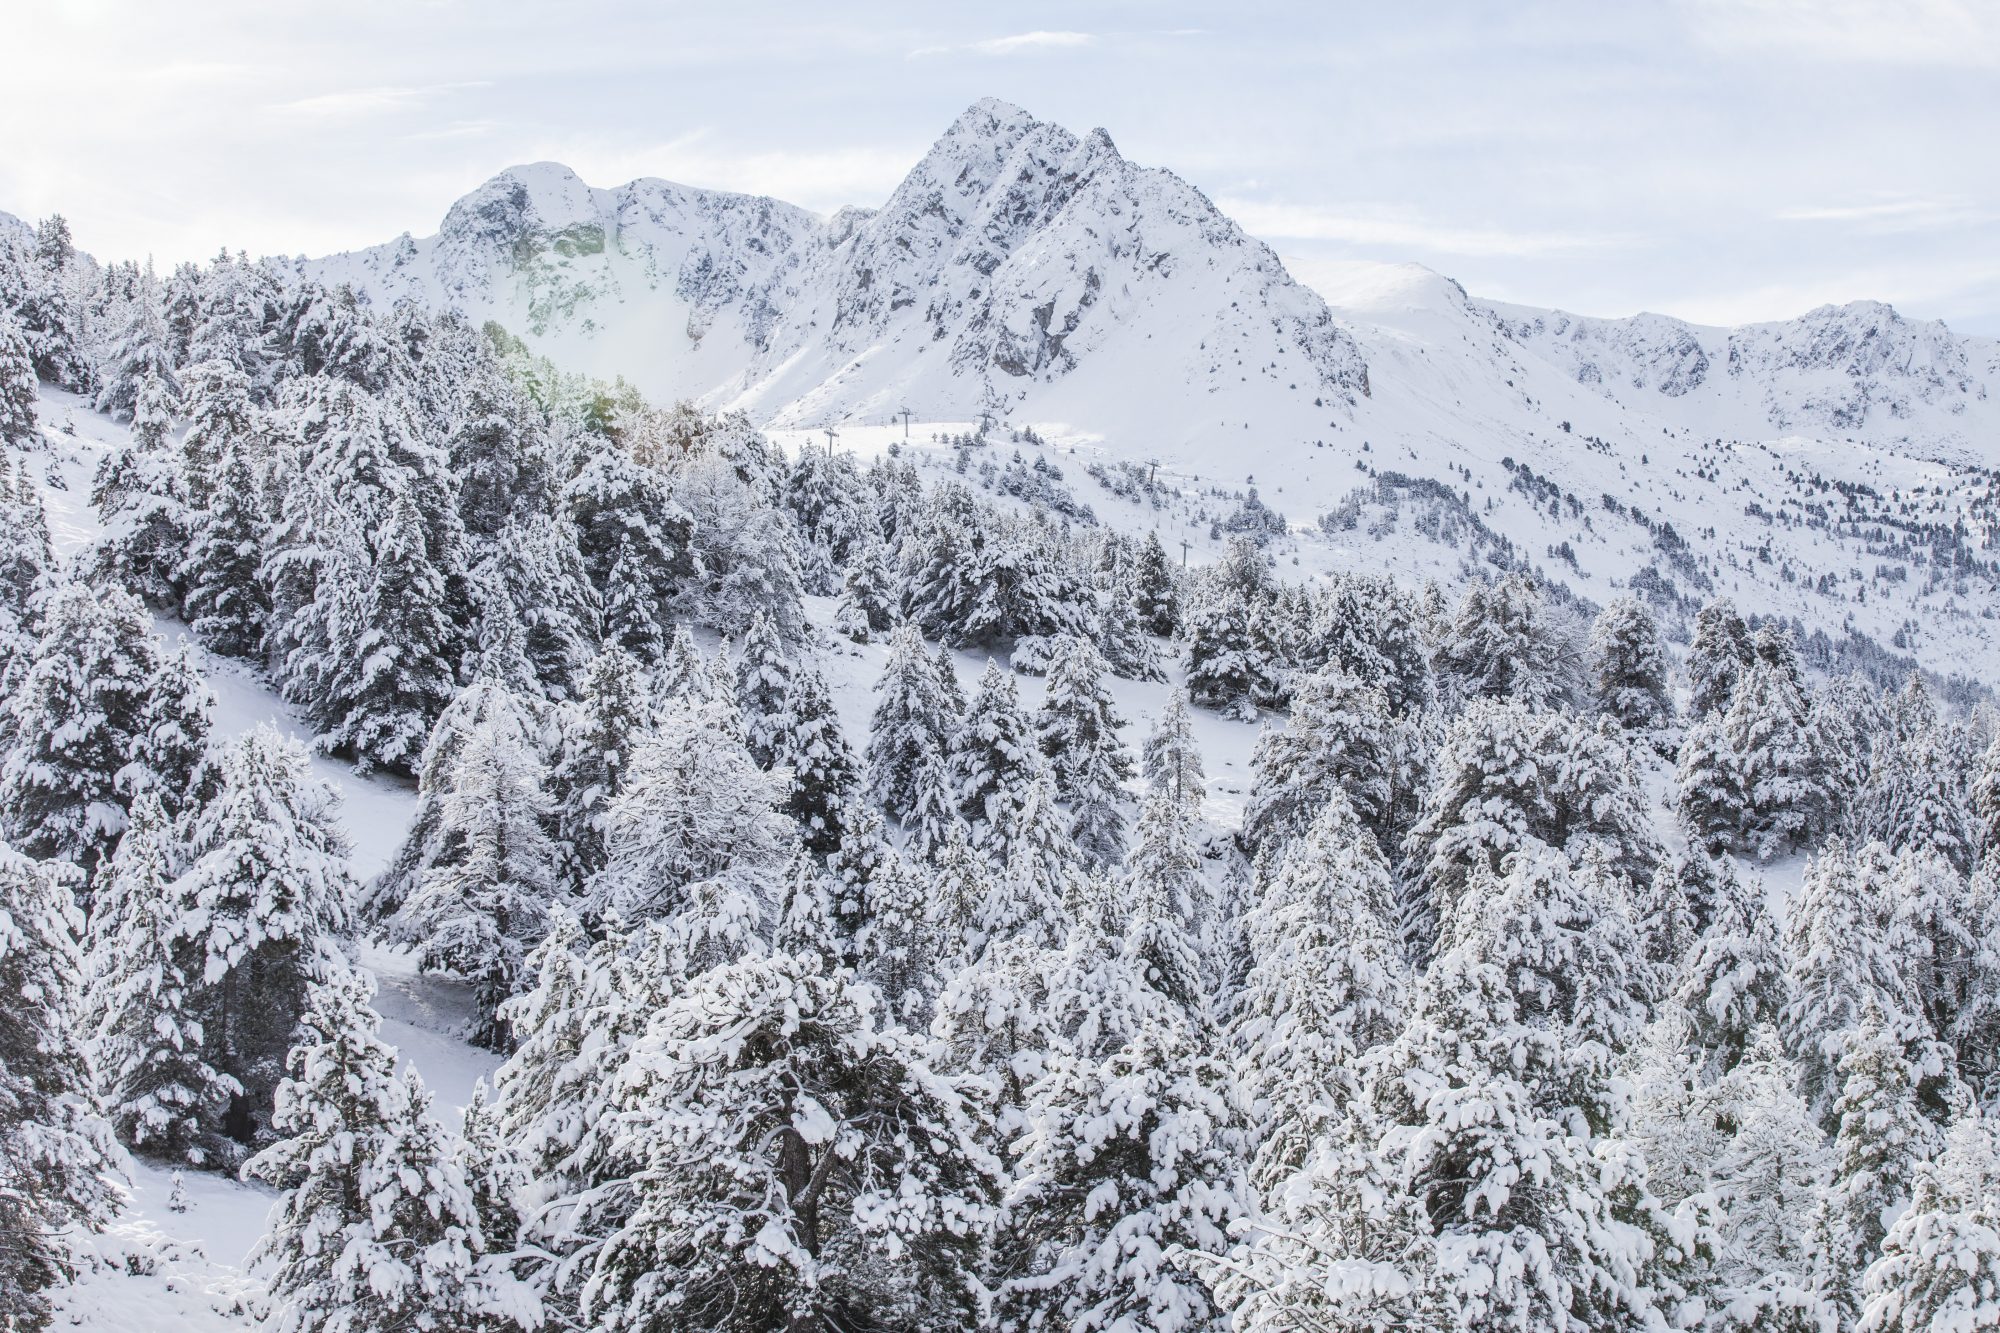 Grandvalira after a snowstorm. The continuity of Grandvalira guaranteed for the long term with the addition of Ordino Arcalís to their skiing experience. - Photo: Grandvalira. 